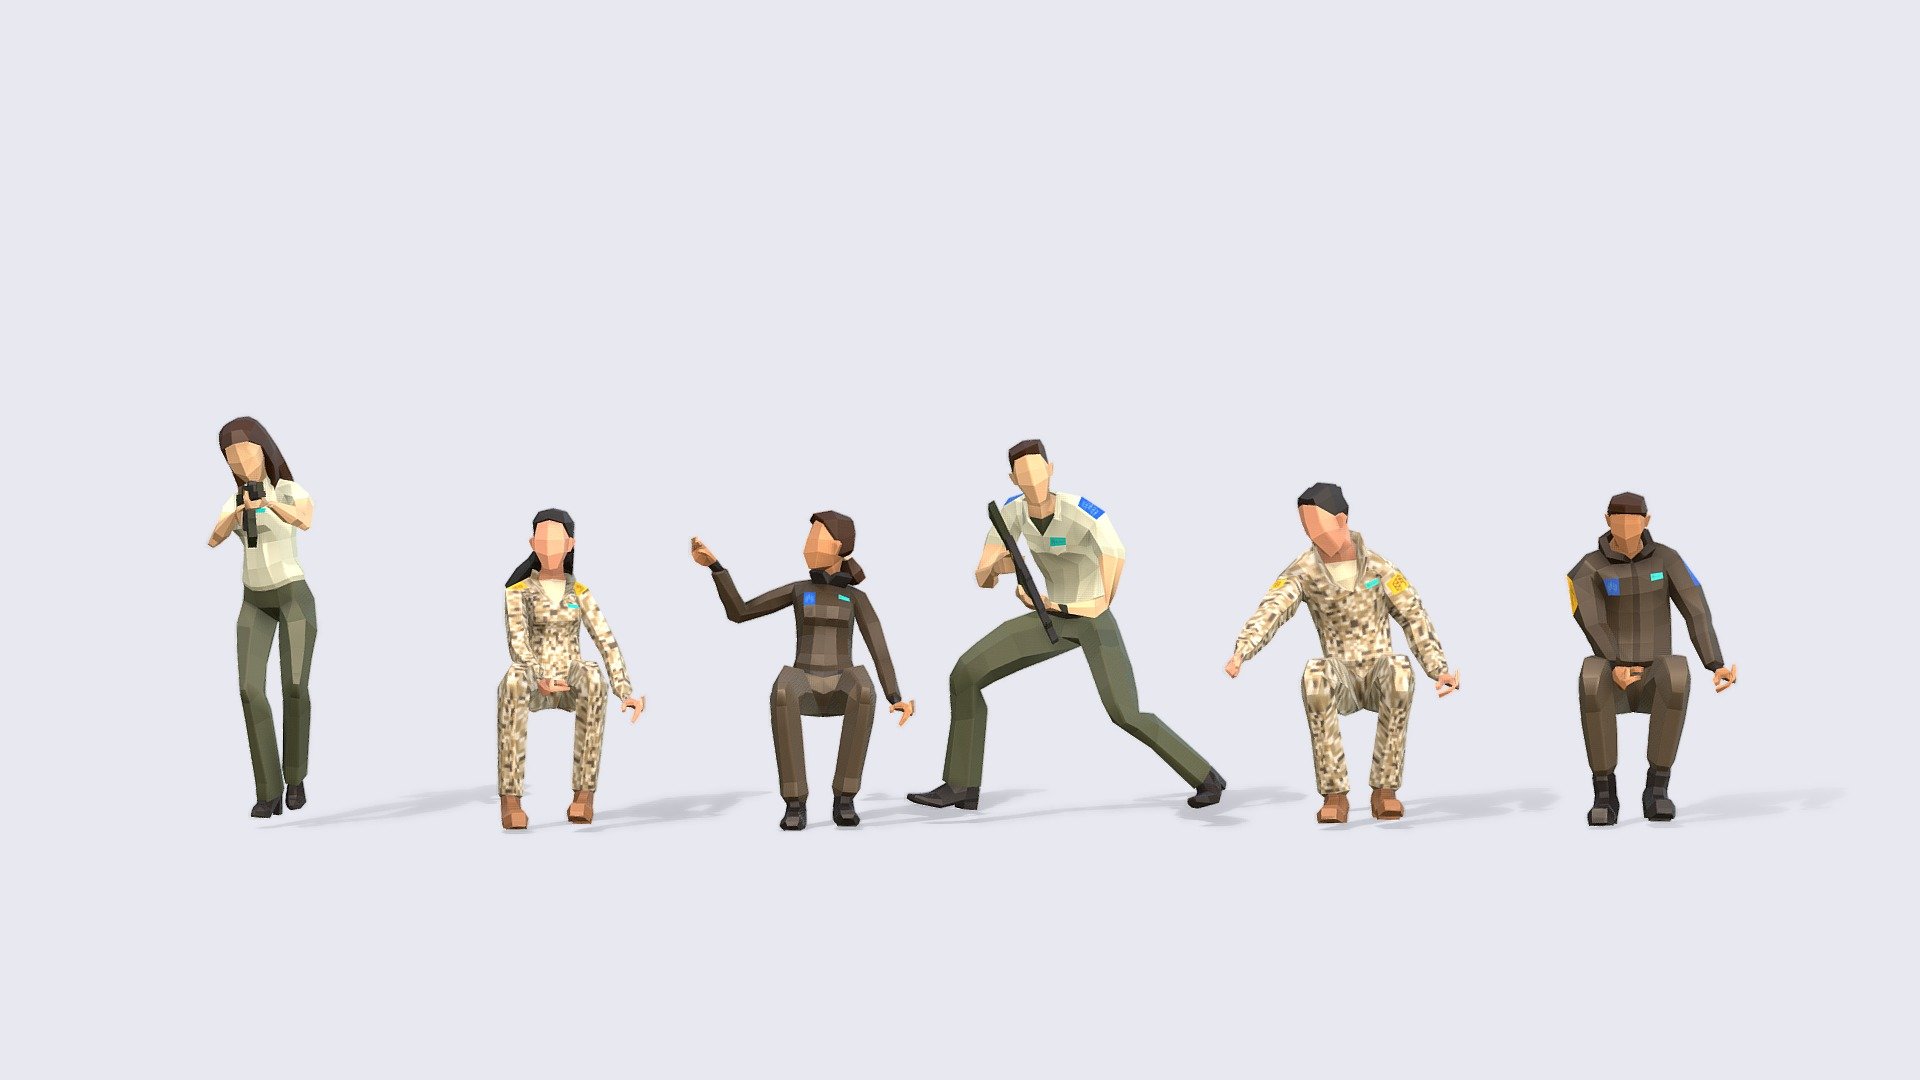 LOW POLY ARMY - AIR FORCE SOLDIERS
Give some unique style to your crowds with our collection of low poly people. A super versatile pack of Low Poly People where all models interact. Plus all models can use the same or vary the 3 different textures.

INCLUDES:




Independent Rest Pose file FBX, perfect for Animating with mixamo or your chosen platform

Independent Animated FBX file that includes all 6 looping animations 100 frames

Full Pack Blender Native file with all characters together.

Textures created for the pack.






Included in the Protect &amp;amp; Serve Bundle

Also in The Compilation
 - Air Force Soldiers - Animated & Rigged - Buy Royalty Free 3D model by Studio Ochi (@studioochi) 3d model